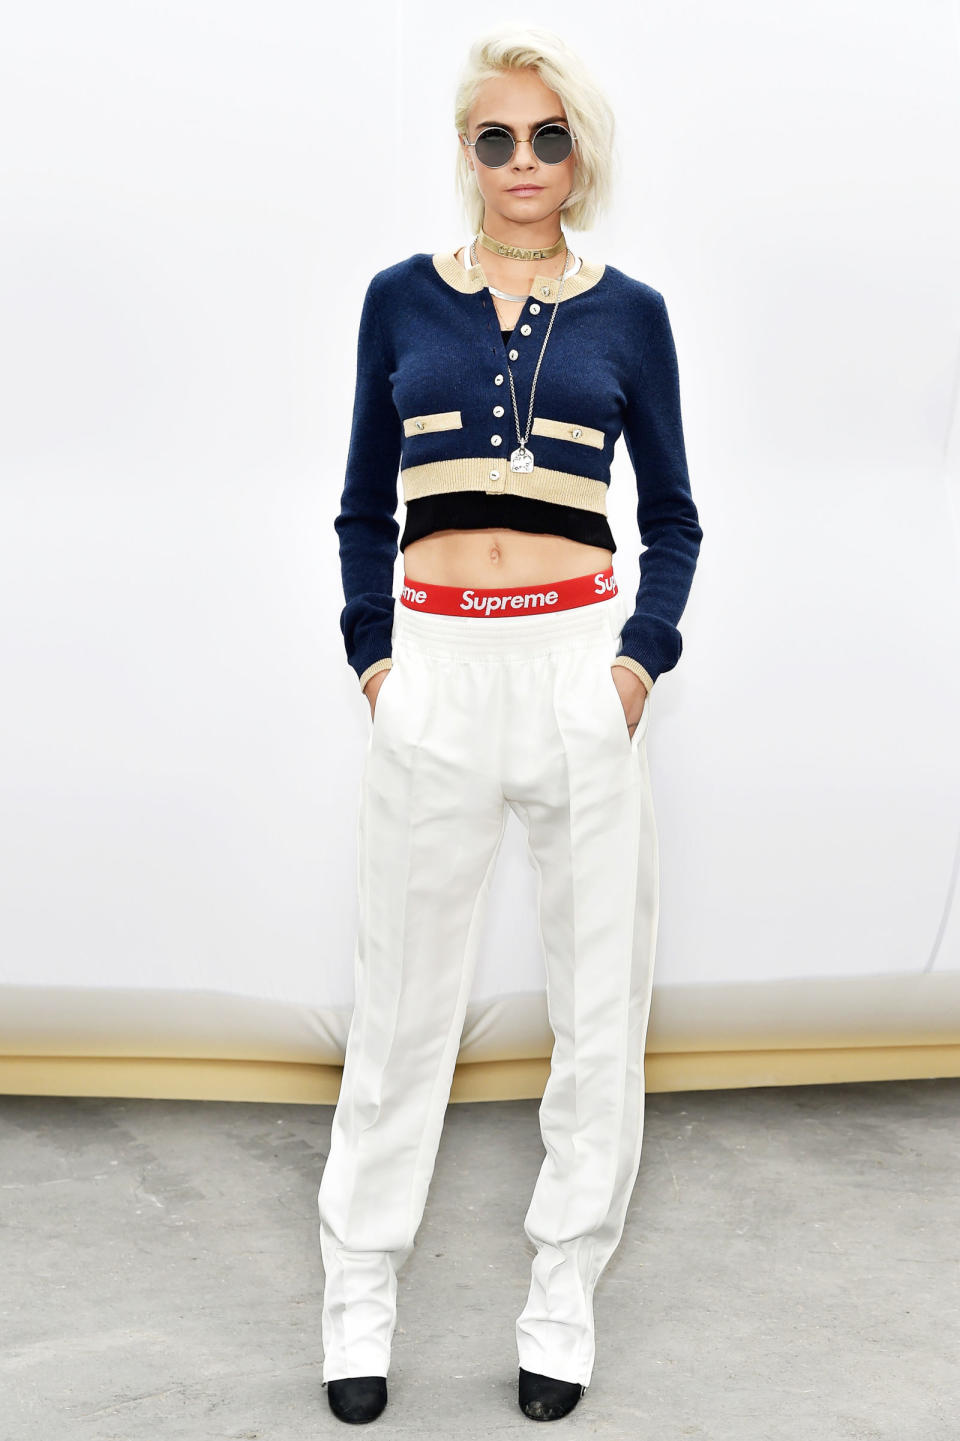 <p>Who: Cara Delevingne </p><p>When: March 7, 2017</p><p>What: Chanel, Supreme</p><p>Why: This is a, ahem, <i>supreme </i>example of high-low styling (sorry). Delevigne mixes boxers, a Chanel blazer, and track pants into one inspired outfit at the Chanel runway show. </p>